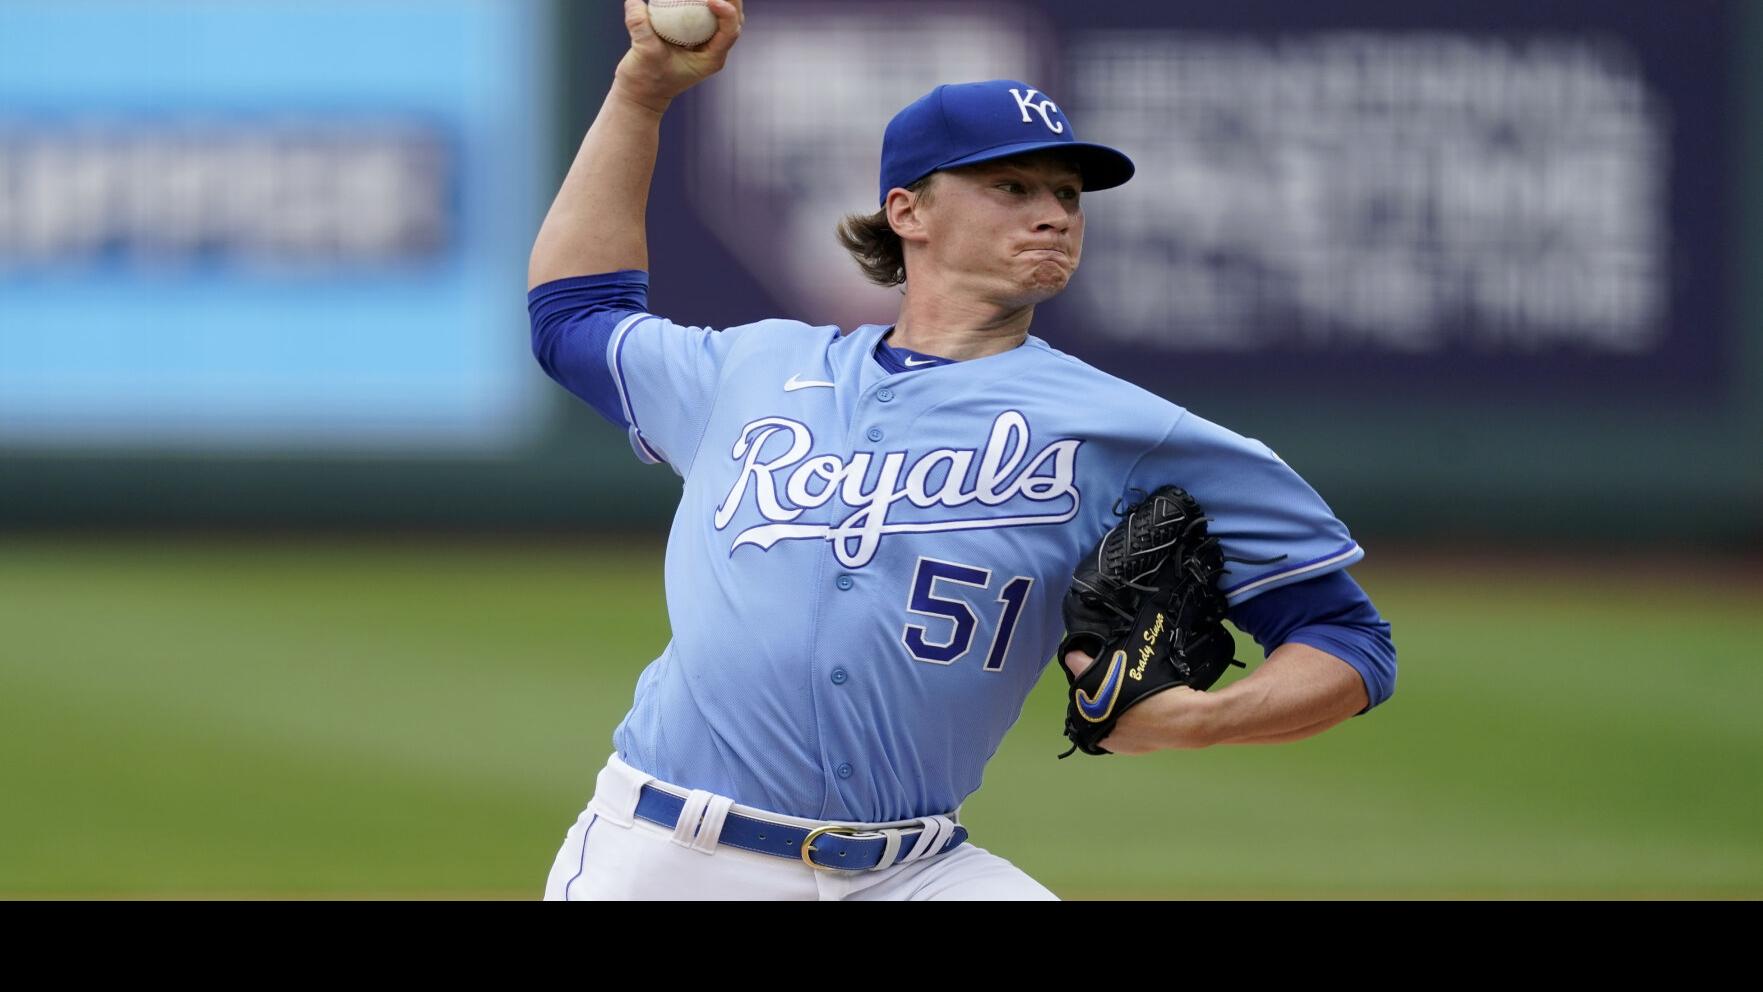 Royals RHP Singer, Brewers All-Star Burnes lose salary arbitration cases, Pro Sports